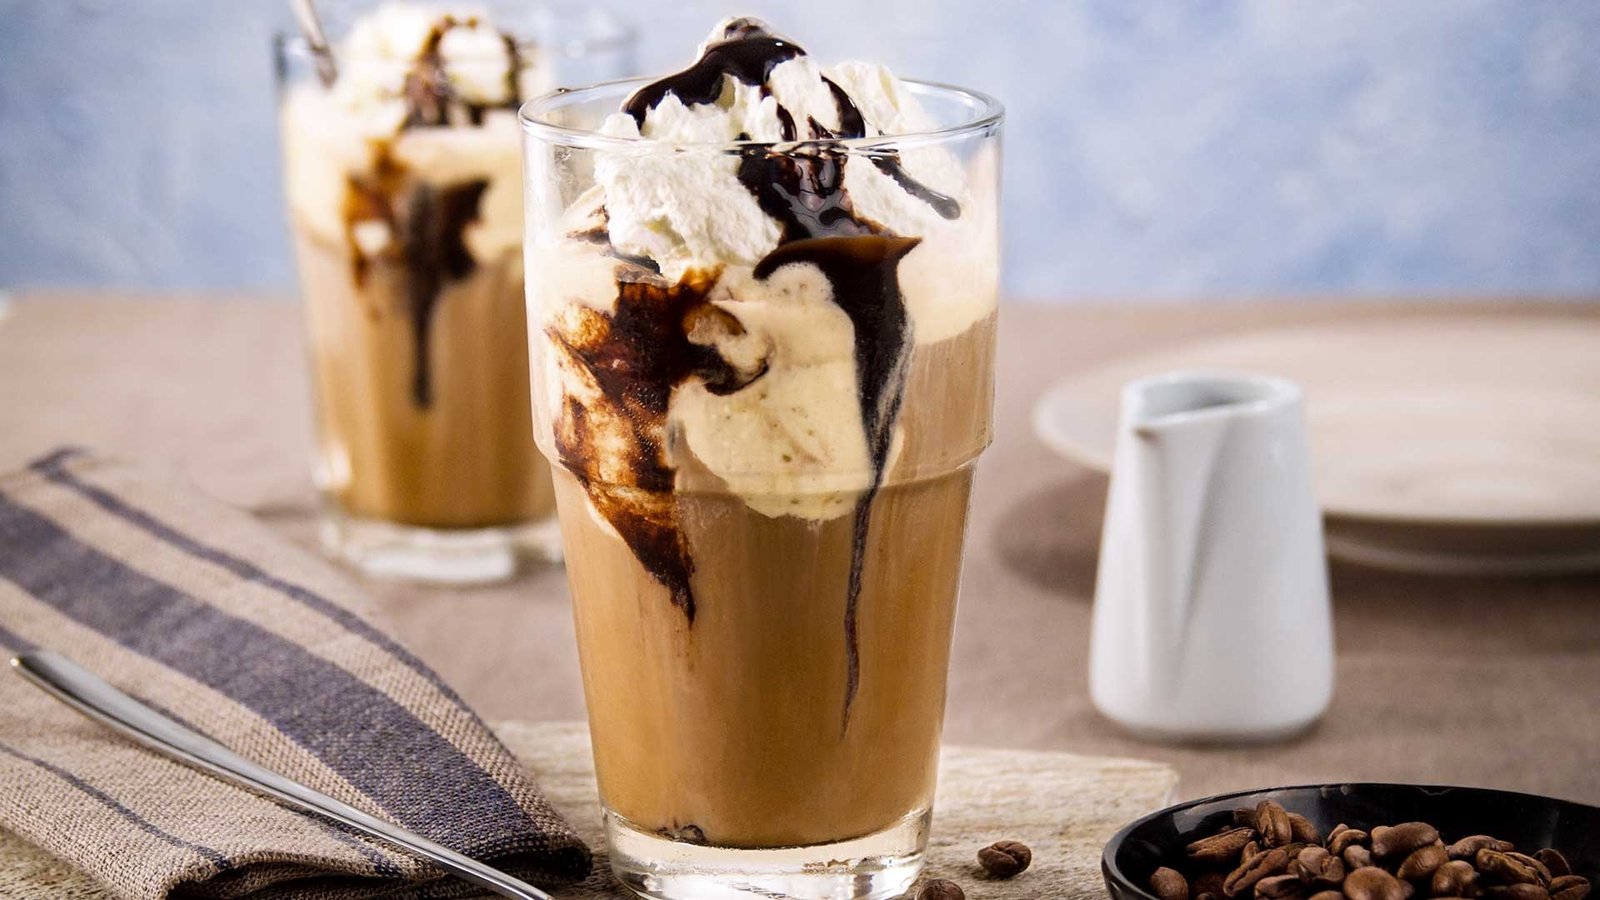 Make your own iced coffee